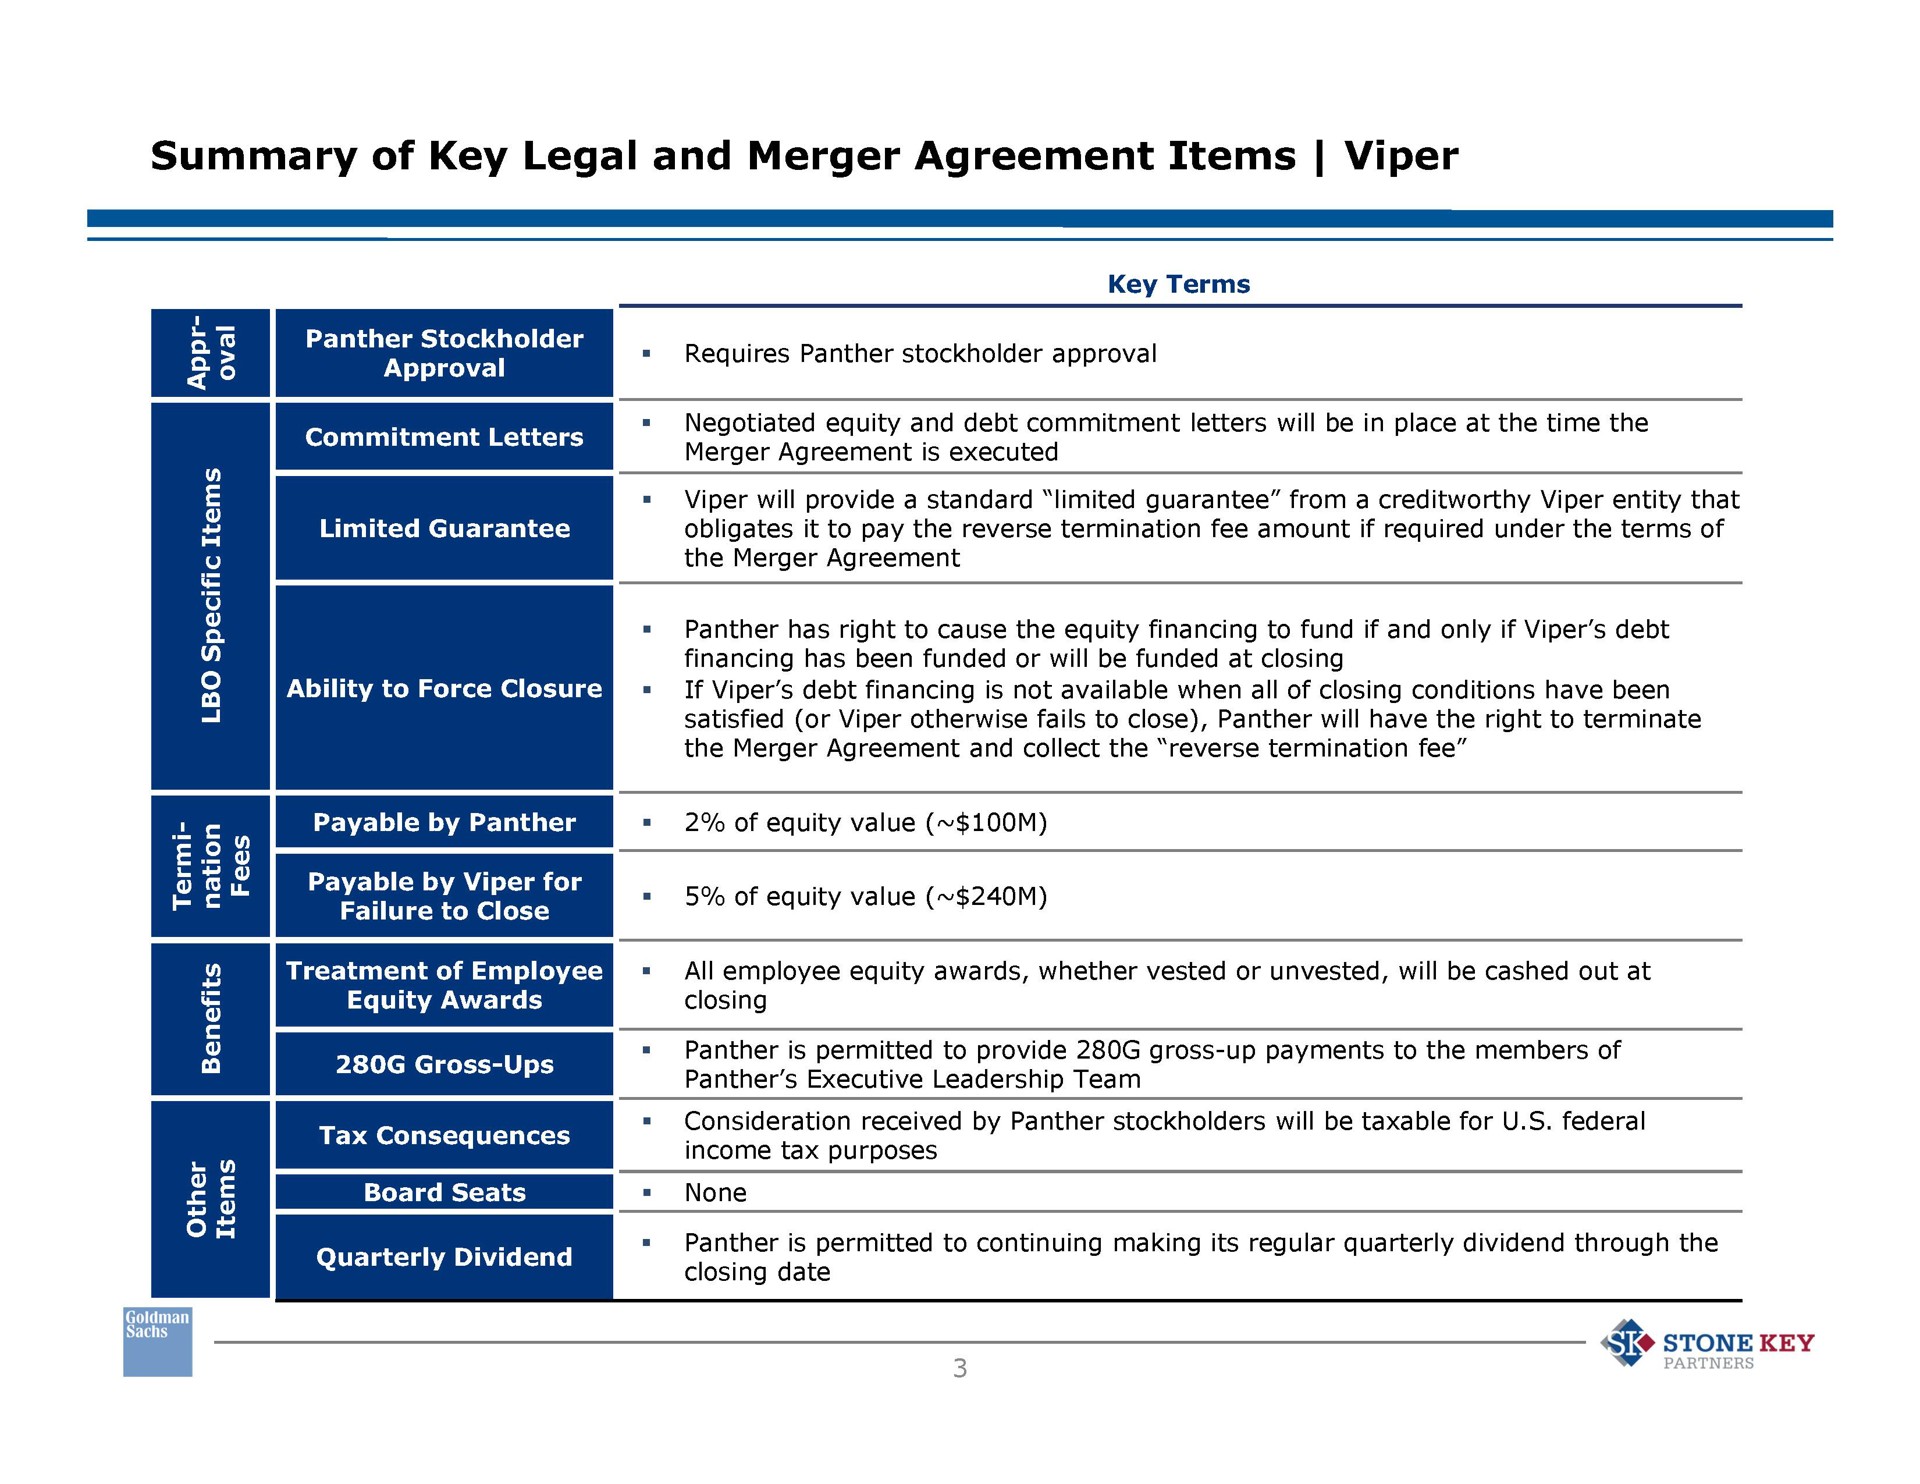 summary of key legal and merger agreement items viper approval a commitment letters panther stockholder treatment of employee equity awards payable by viper for failure to close ability to force closure payable by panther limited guarantee requires panther stockholder approval key terms negotiated equity and debt commitment letters will be in place at the time the merger agreement is executed viper will provide a standard limited guarantee from a viper entity that obligates it to pay the reverse termination fee amount if required under the terms of the merger agreement panther has right to cause the equity financing to fund if and only if viper debt financing has been funded or will be funded at closing if viper debt financing is not available when all of closing conditions have been satisfied or viper otherwise fails to close panther will have the right to terminate the merger agreement and collect the reverse termination fee of equity value of equity value all employee equity awards whether vested or unvested will be cashed out at closing gross ups tax consequences panther is permitted to provide gross up payments to the members of panther executive leadership team consideration received by panther stockholders will be taxable for federal income tax purposes board seats none quarterly dividend panther is permitted to continuing making its regular quarterly dividend through the closing date stone key partners | Goldman Sachs